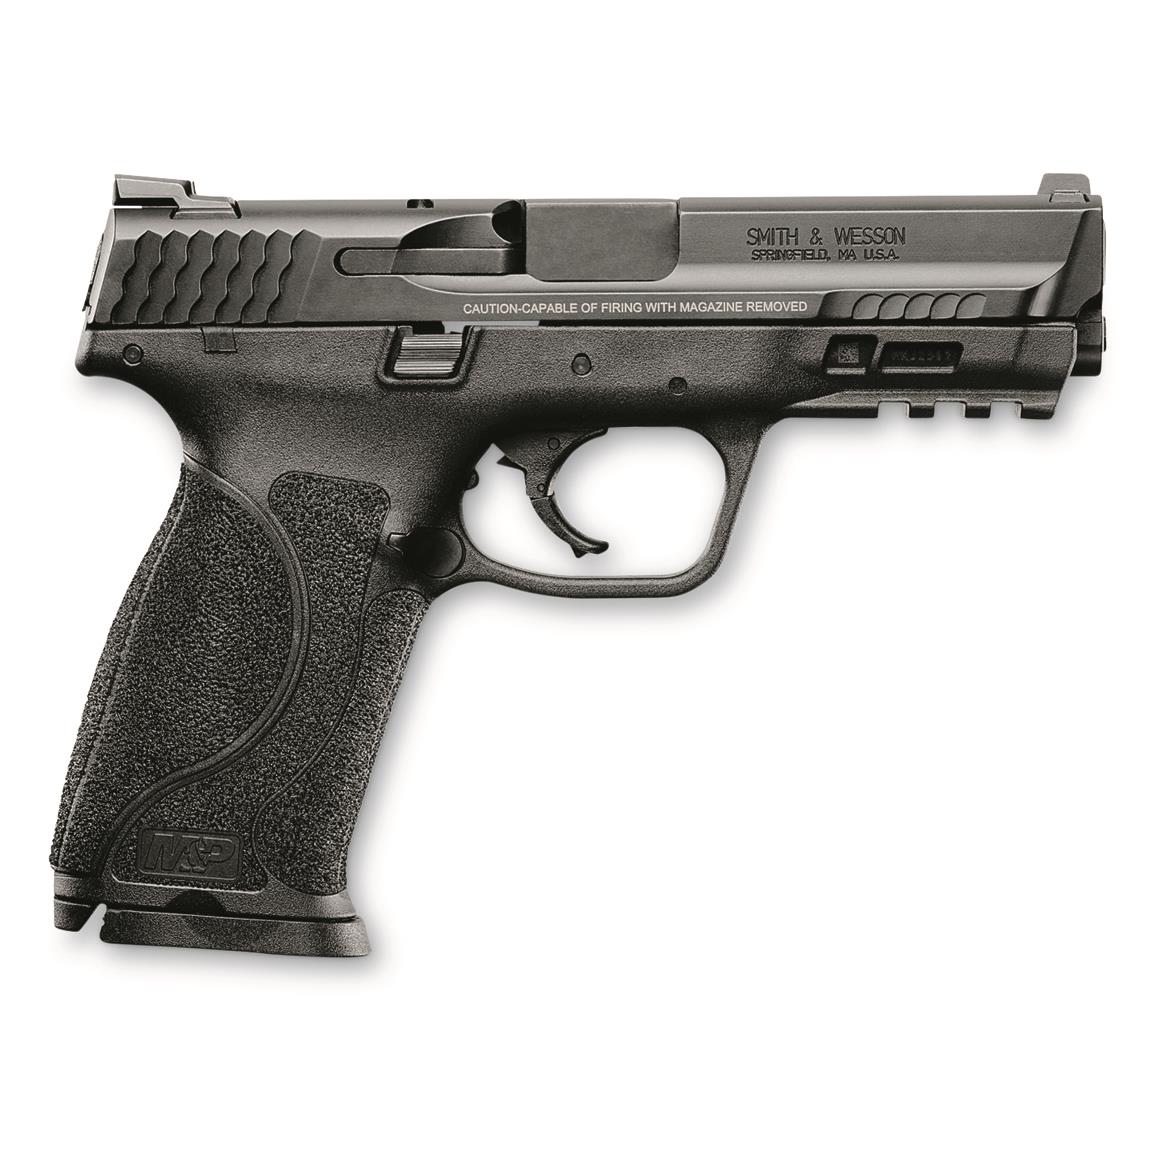 Smith & Wesson M&P9 M2.0, Semi-Automatic, 9mm, 4.25" Barrel, No Safety, 17+1 Rounds